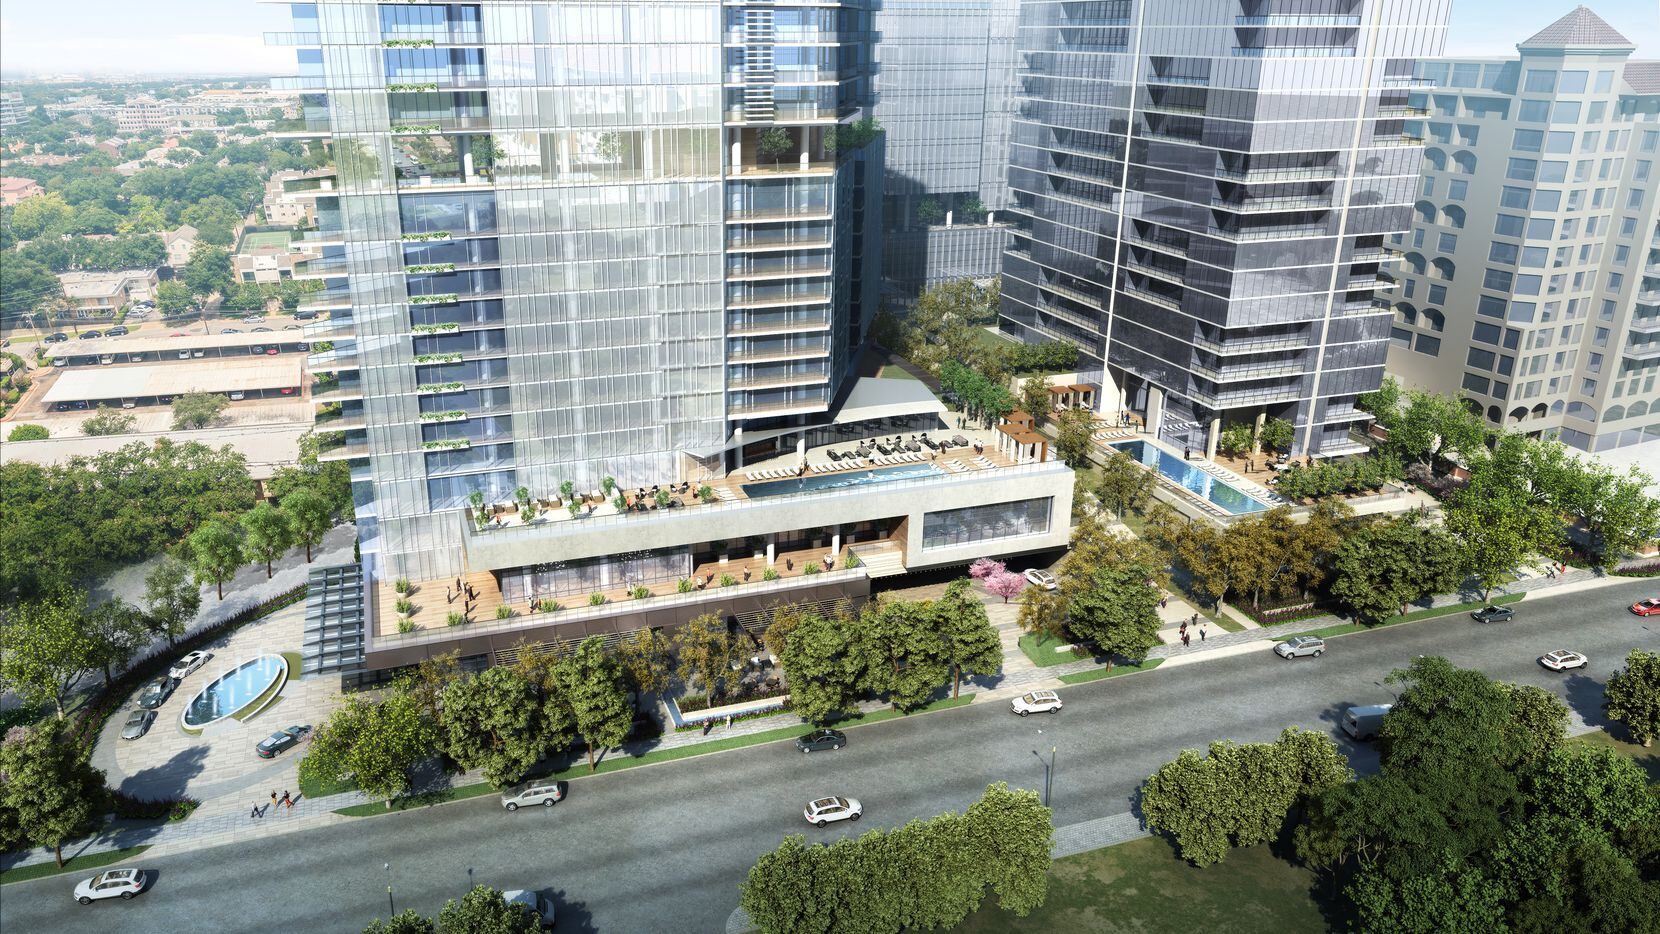 Developers previously planned to build a high-rise mixed-use project on the proeprty.